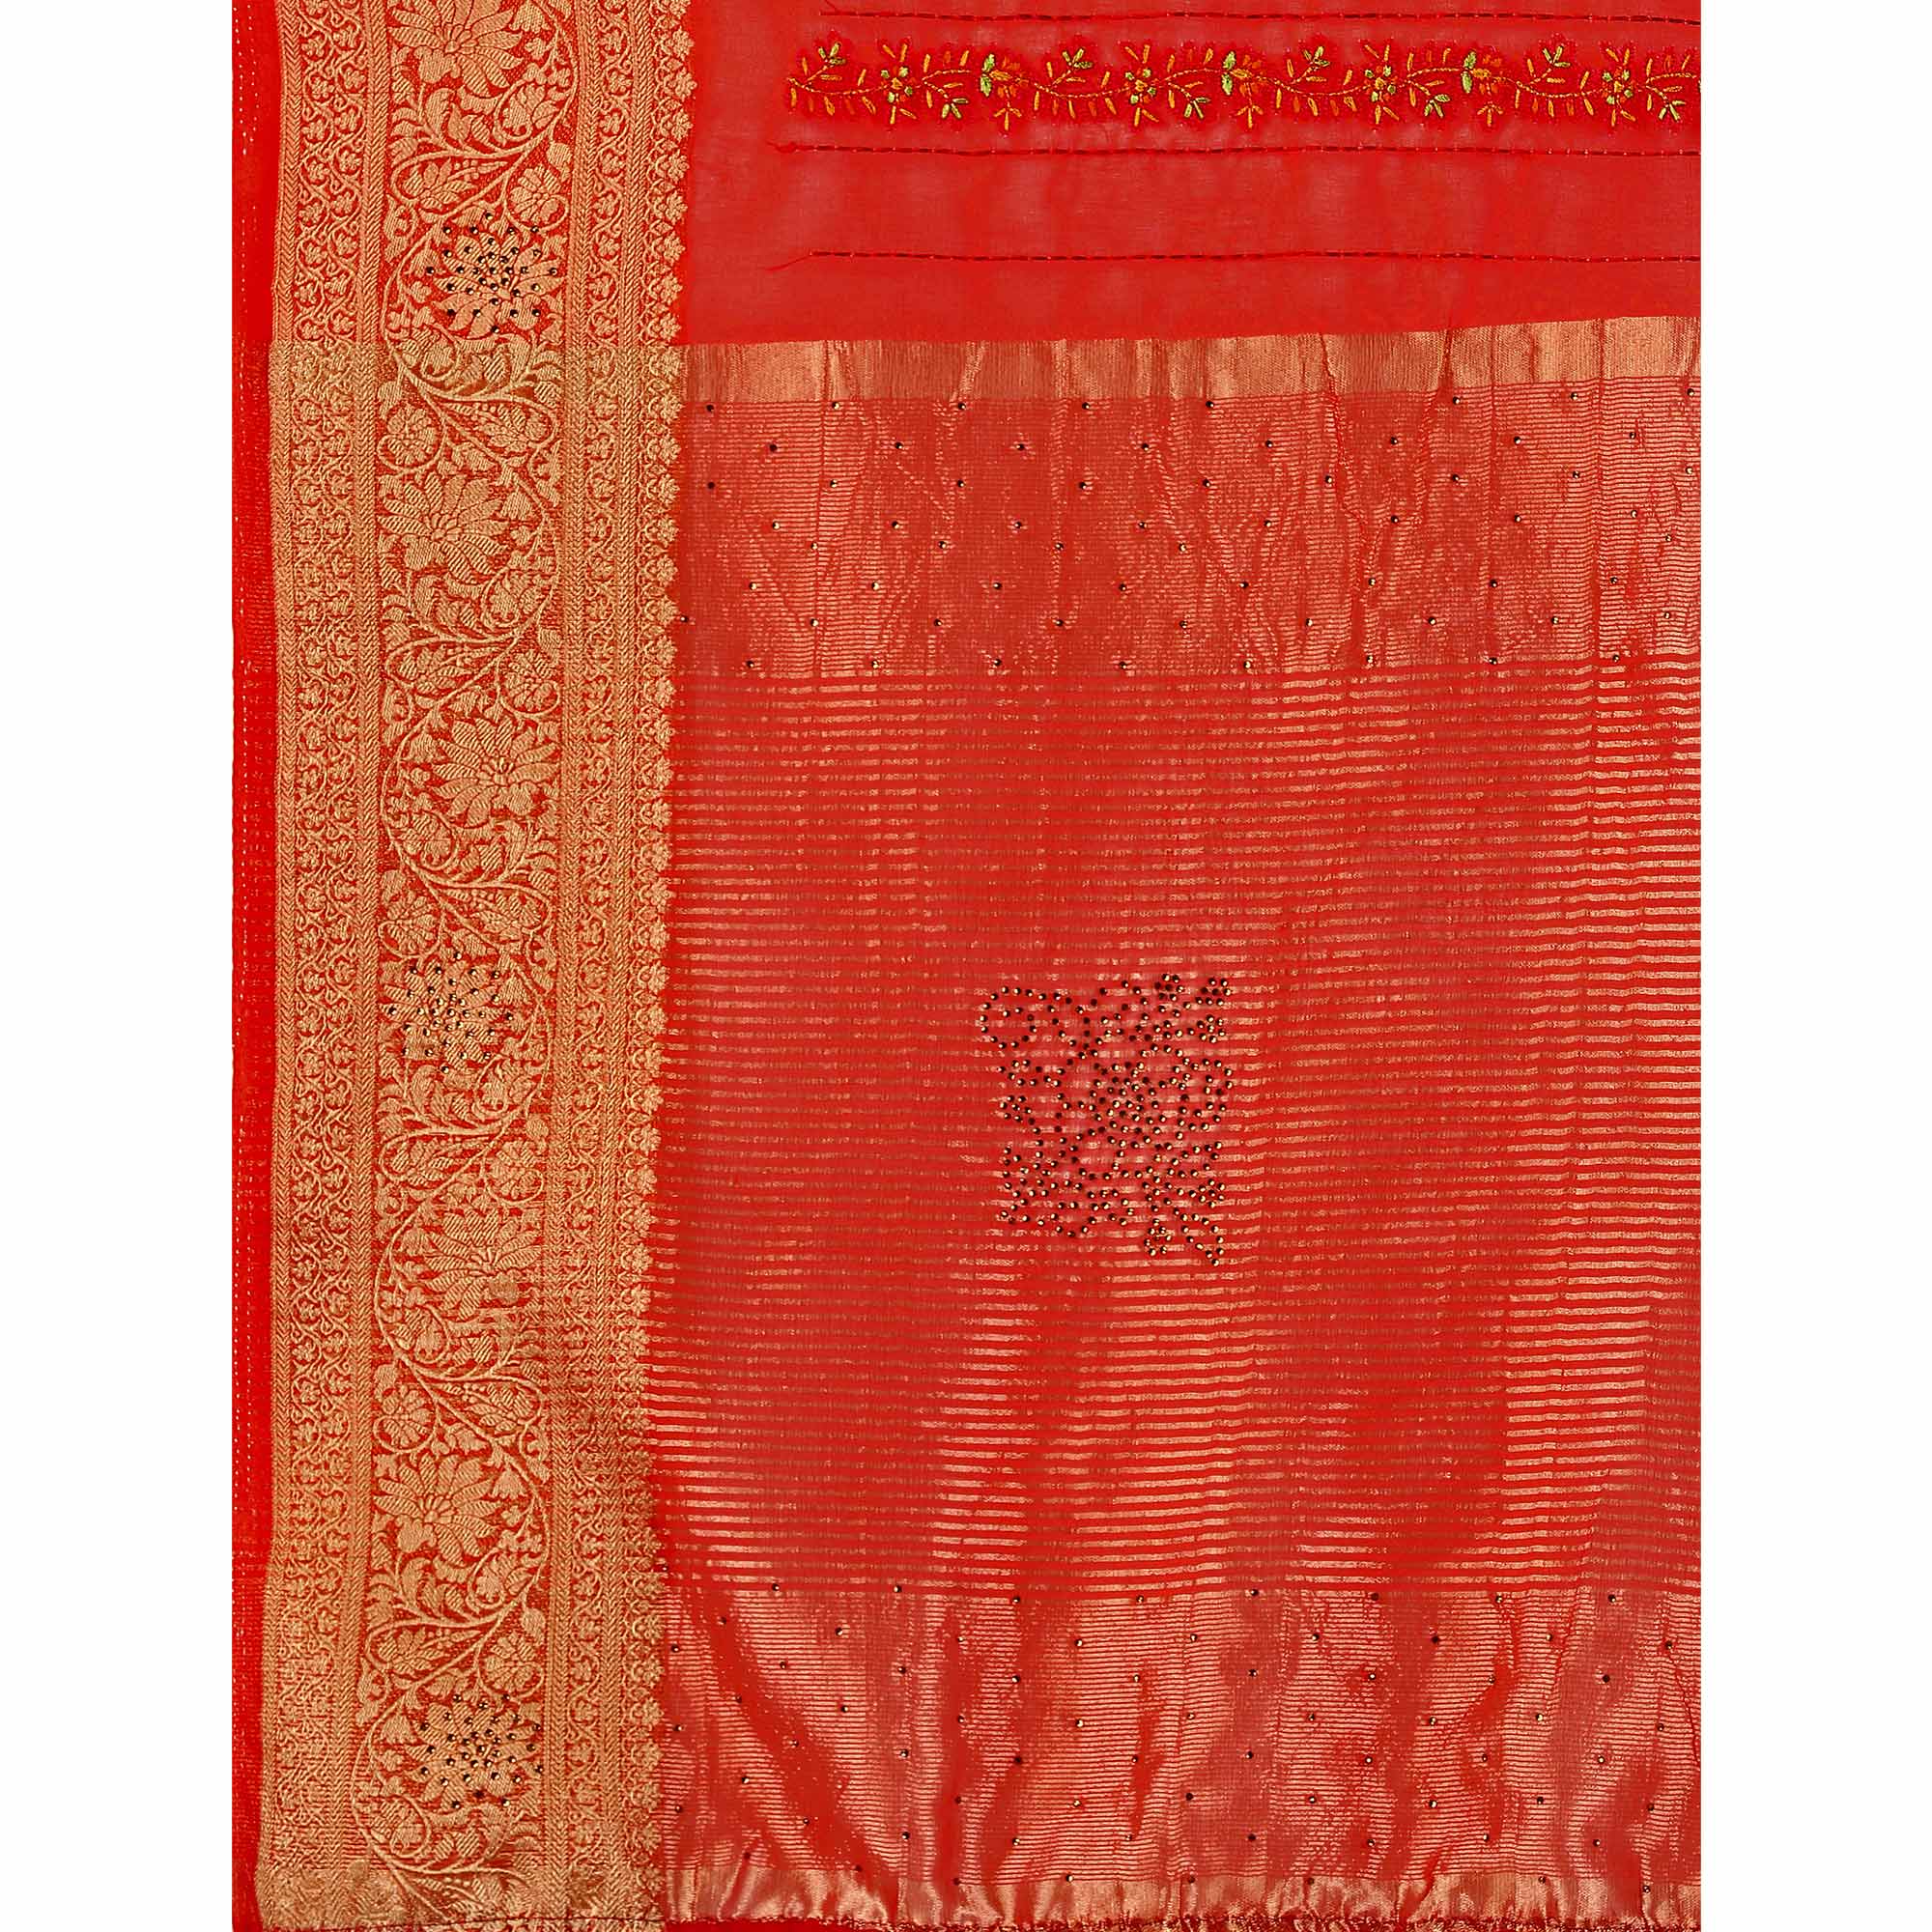 Red Floral Embroidery With Swarovski Work Organza Saree